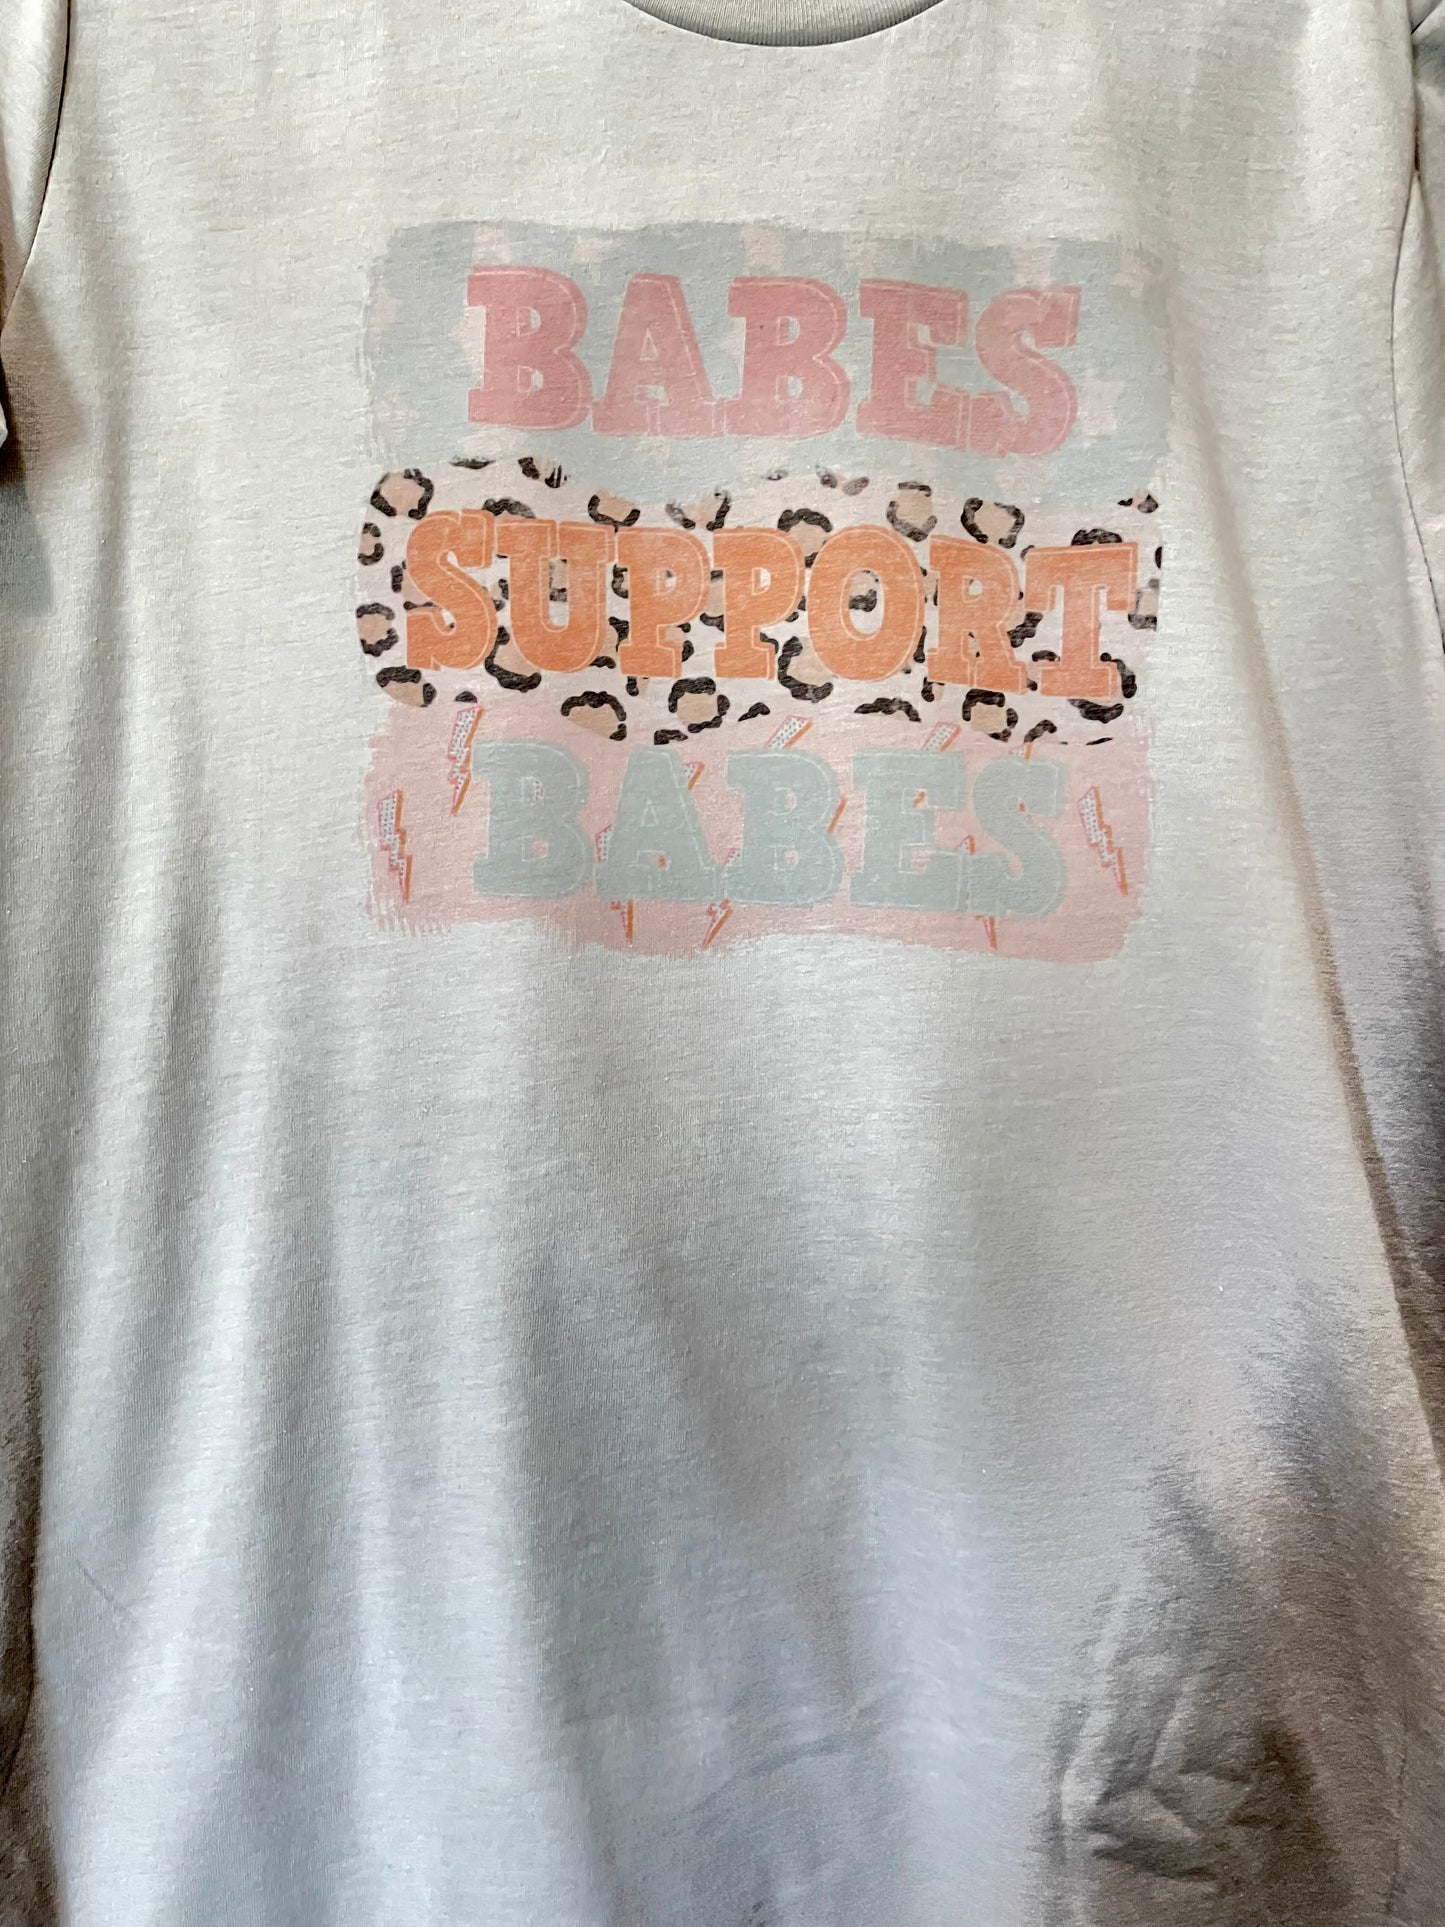 Babes support Babes Graphic T-shirt